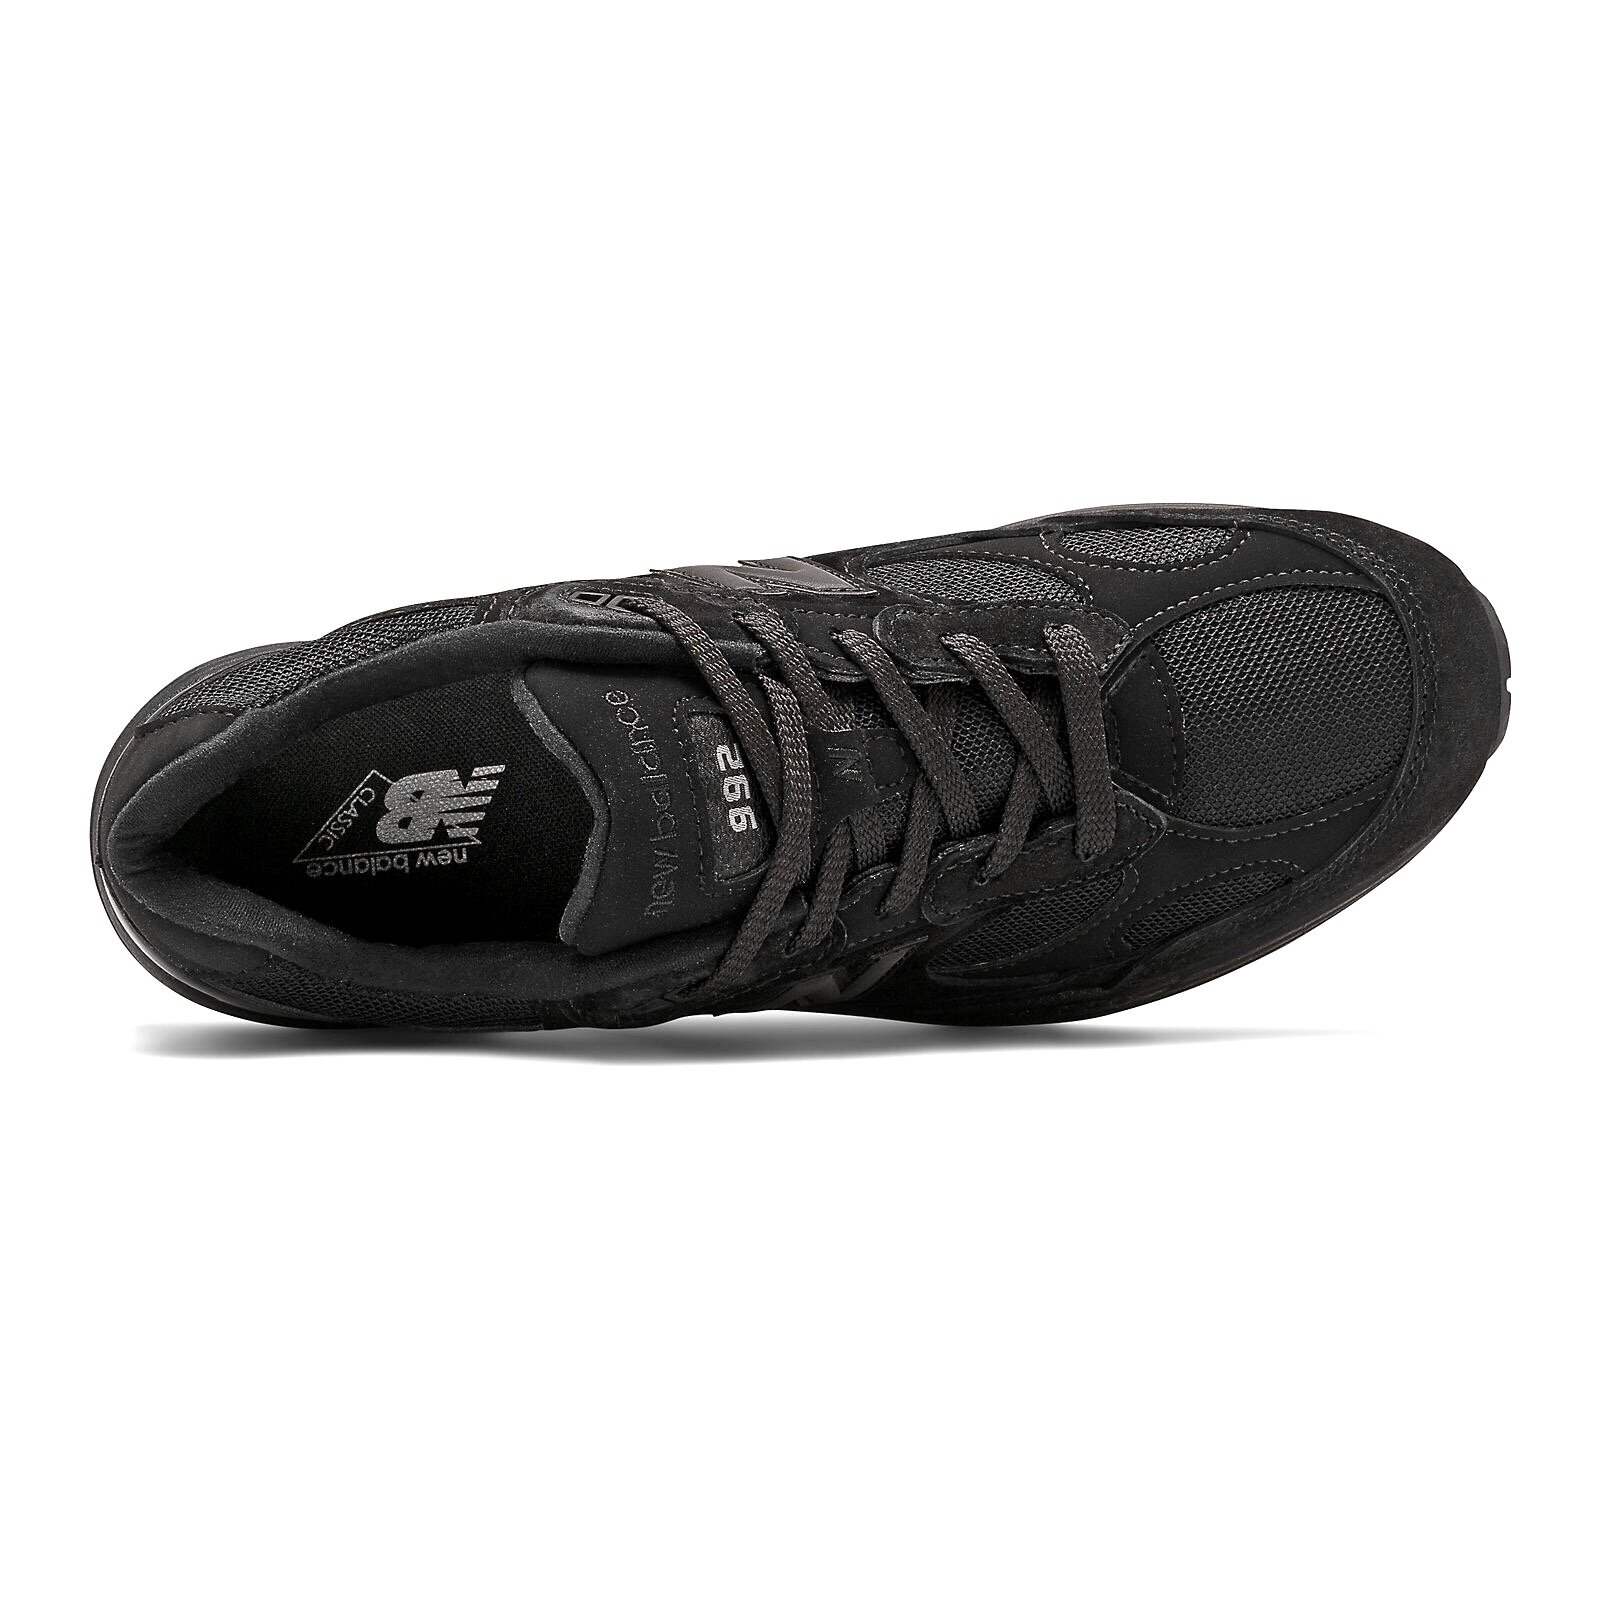 New Balance Made in US 992 Triple Black - Black All Black | All 